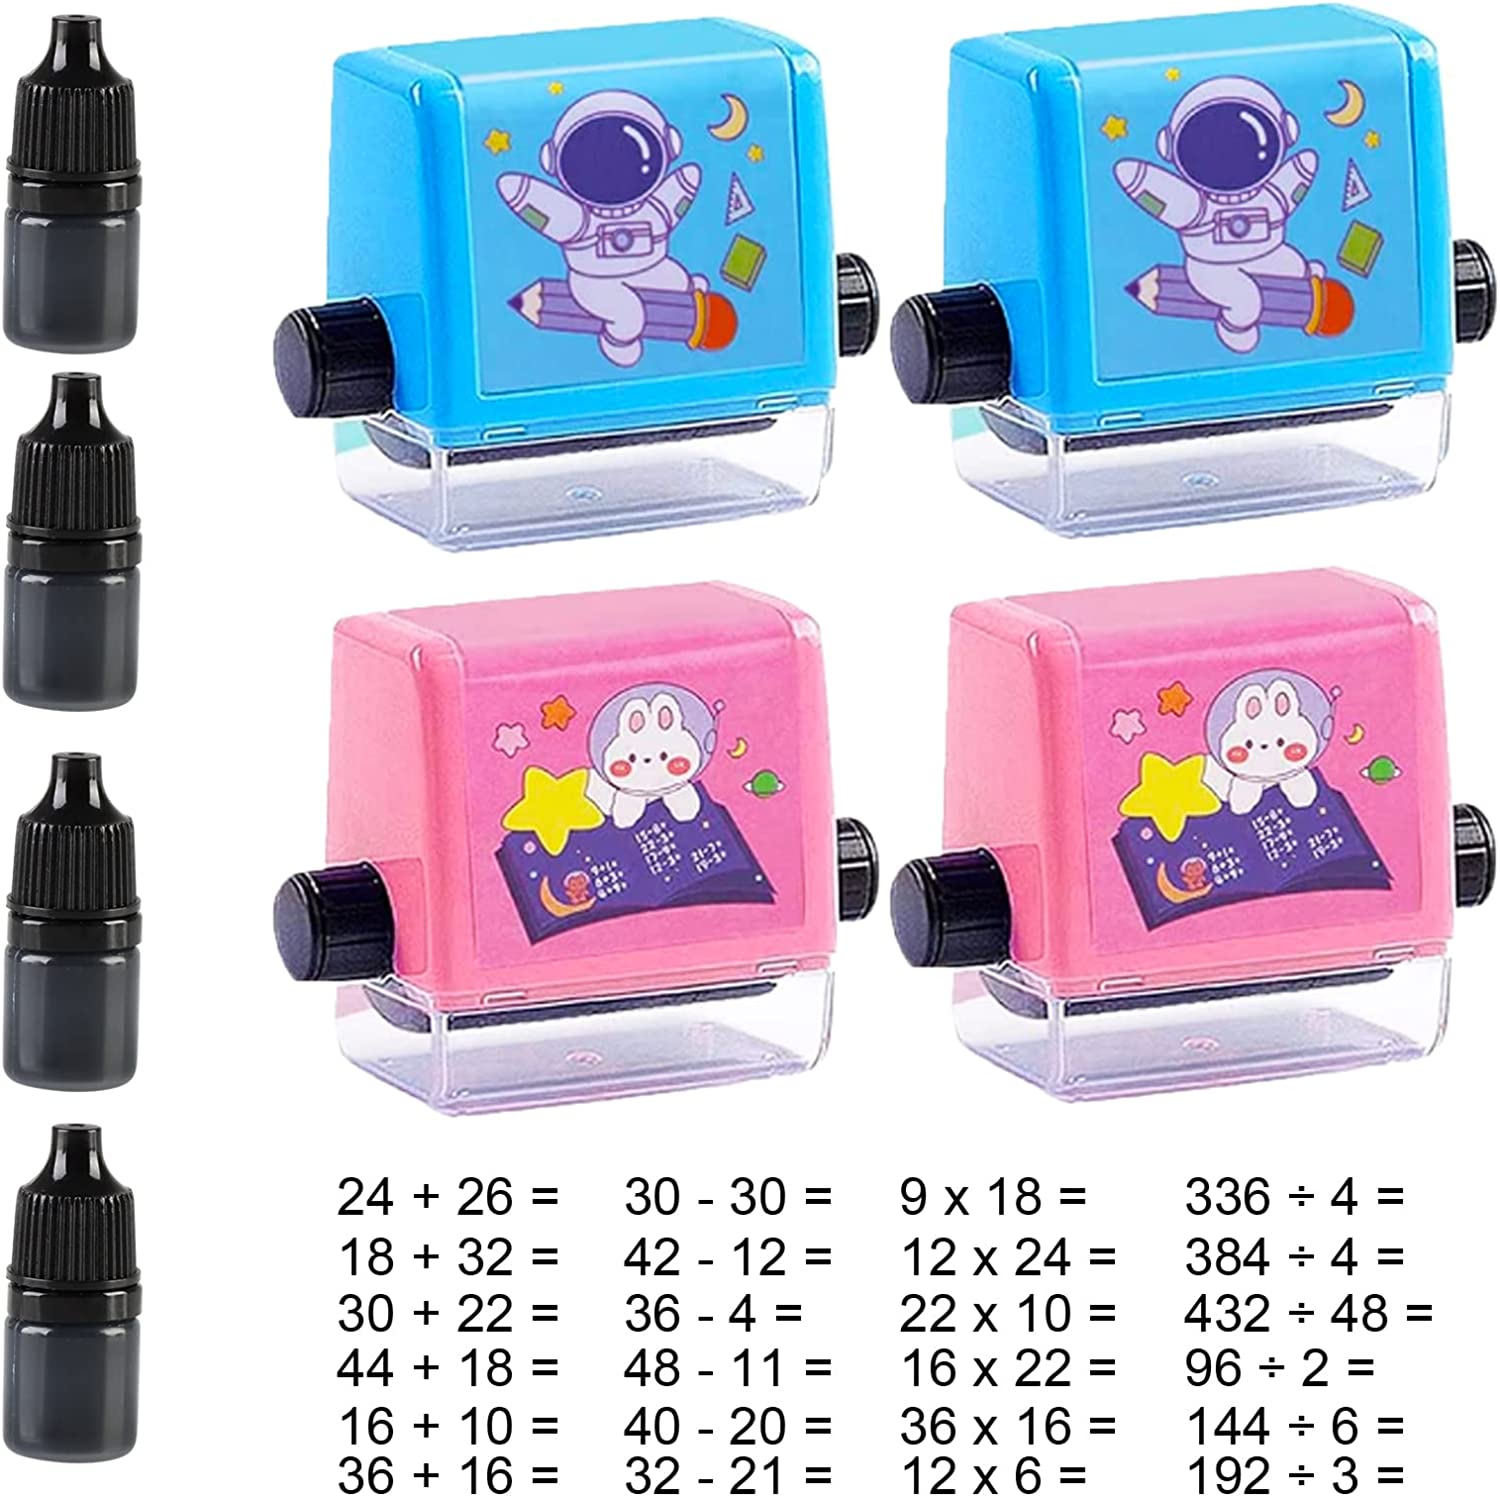 BrightRise Math Mastery Roller Stamps (4 Pack)